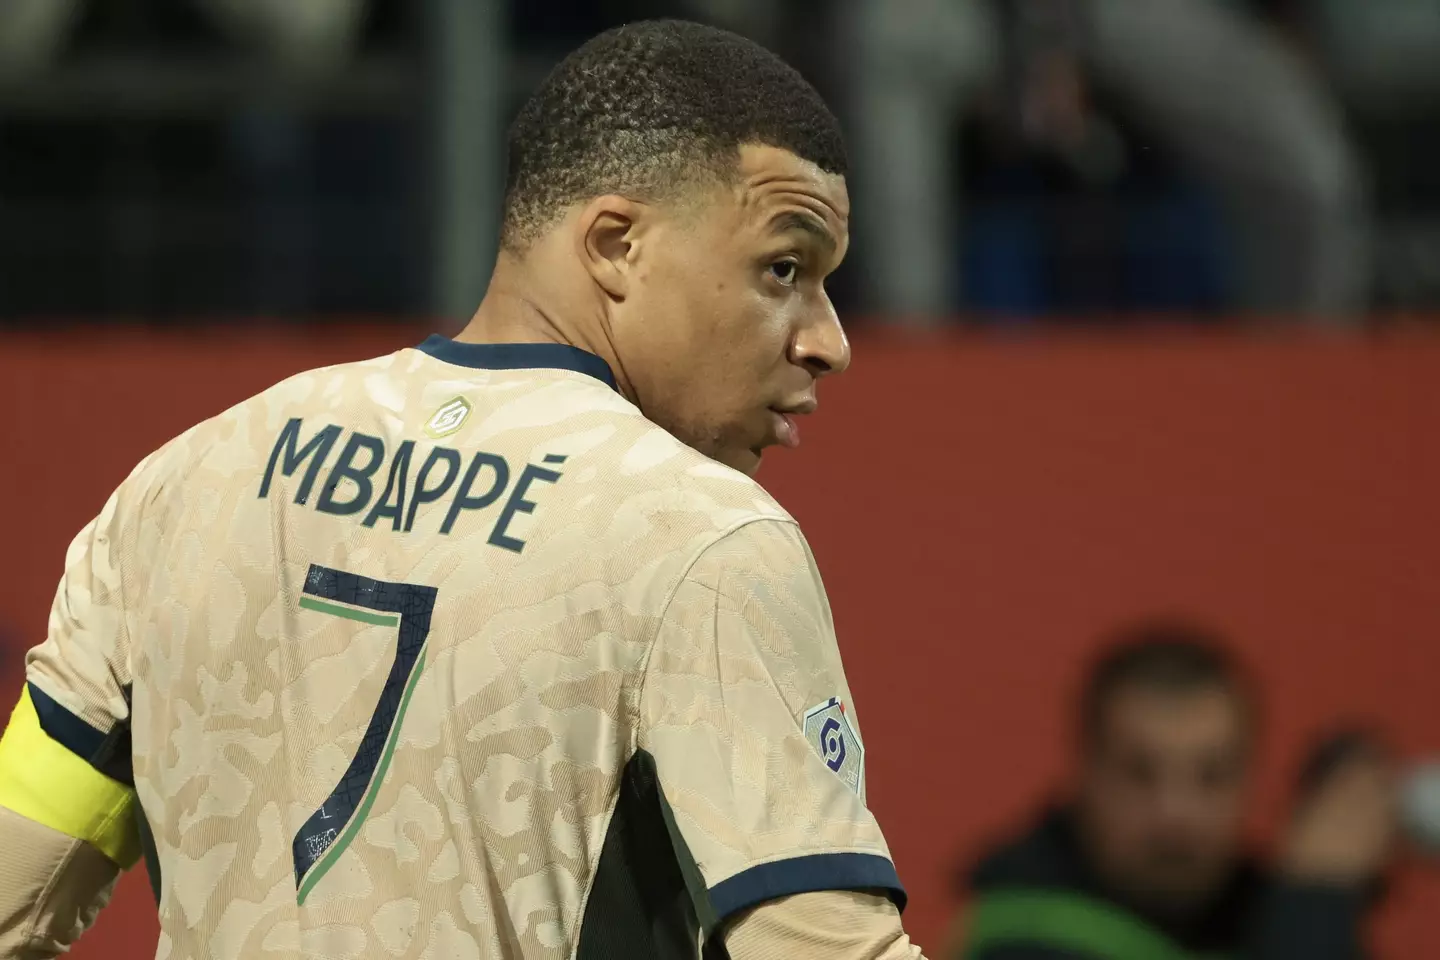 Mbappe has been widely tipped to join Real Madrid (Getty)